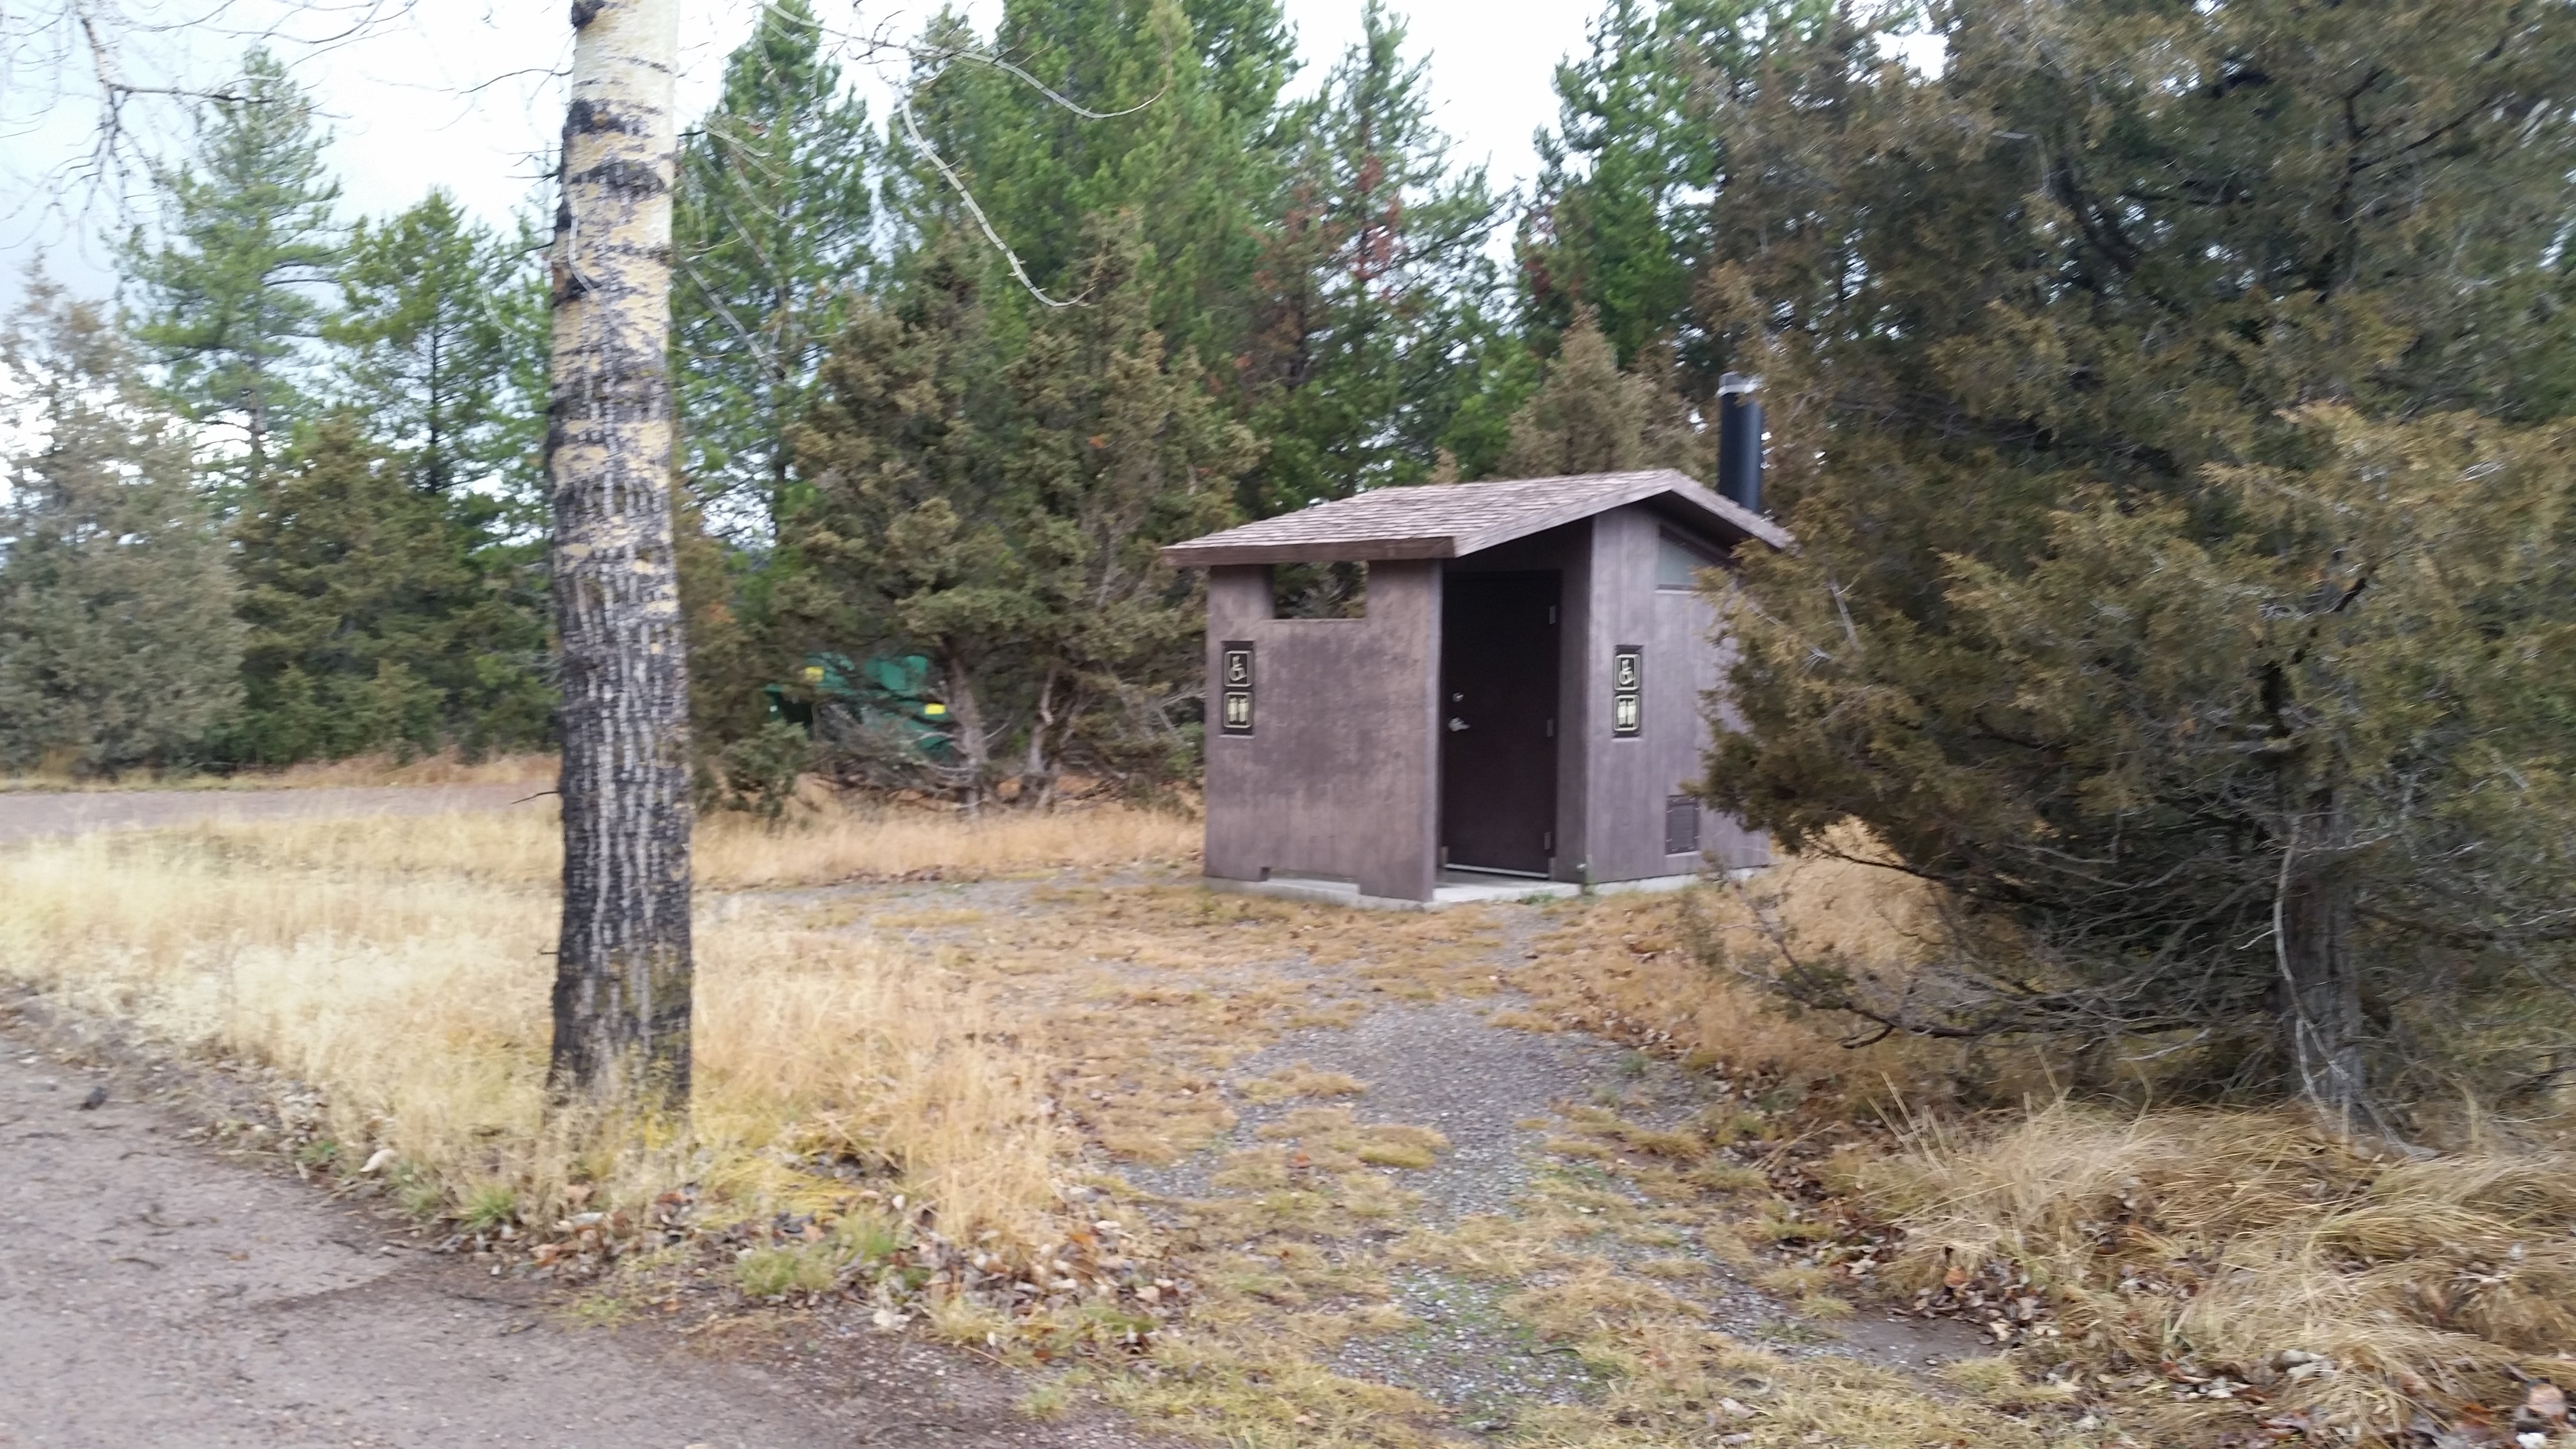 Camper submitted image from Aspen Grove Campground - 5